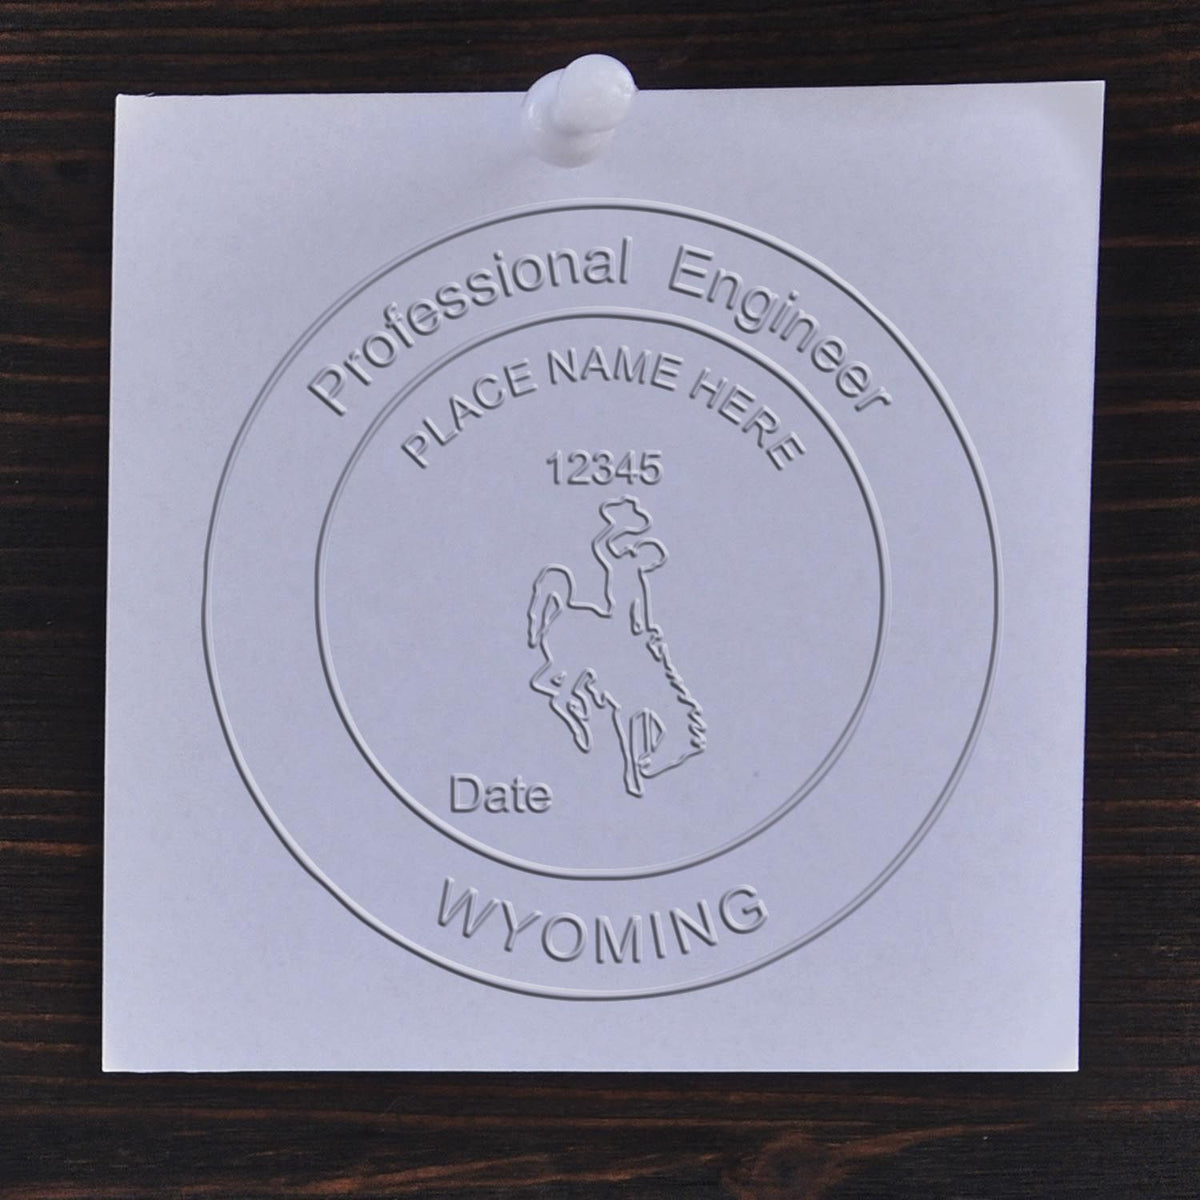 A stamped impression of the Long Reach Wyoming PE Seal in this stylish lifestyle photo, setting the tone for a unique and personalized product.